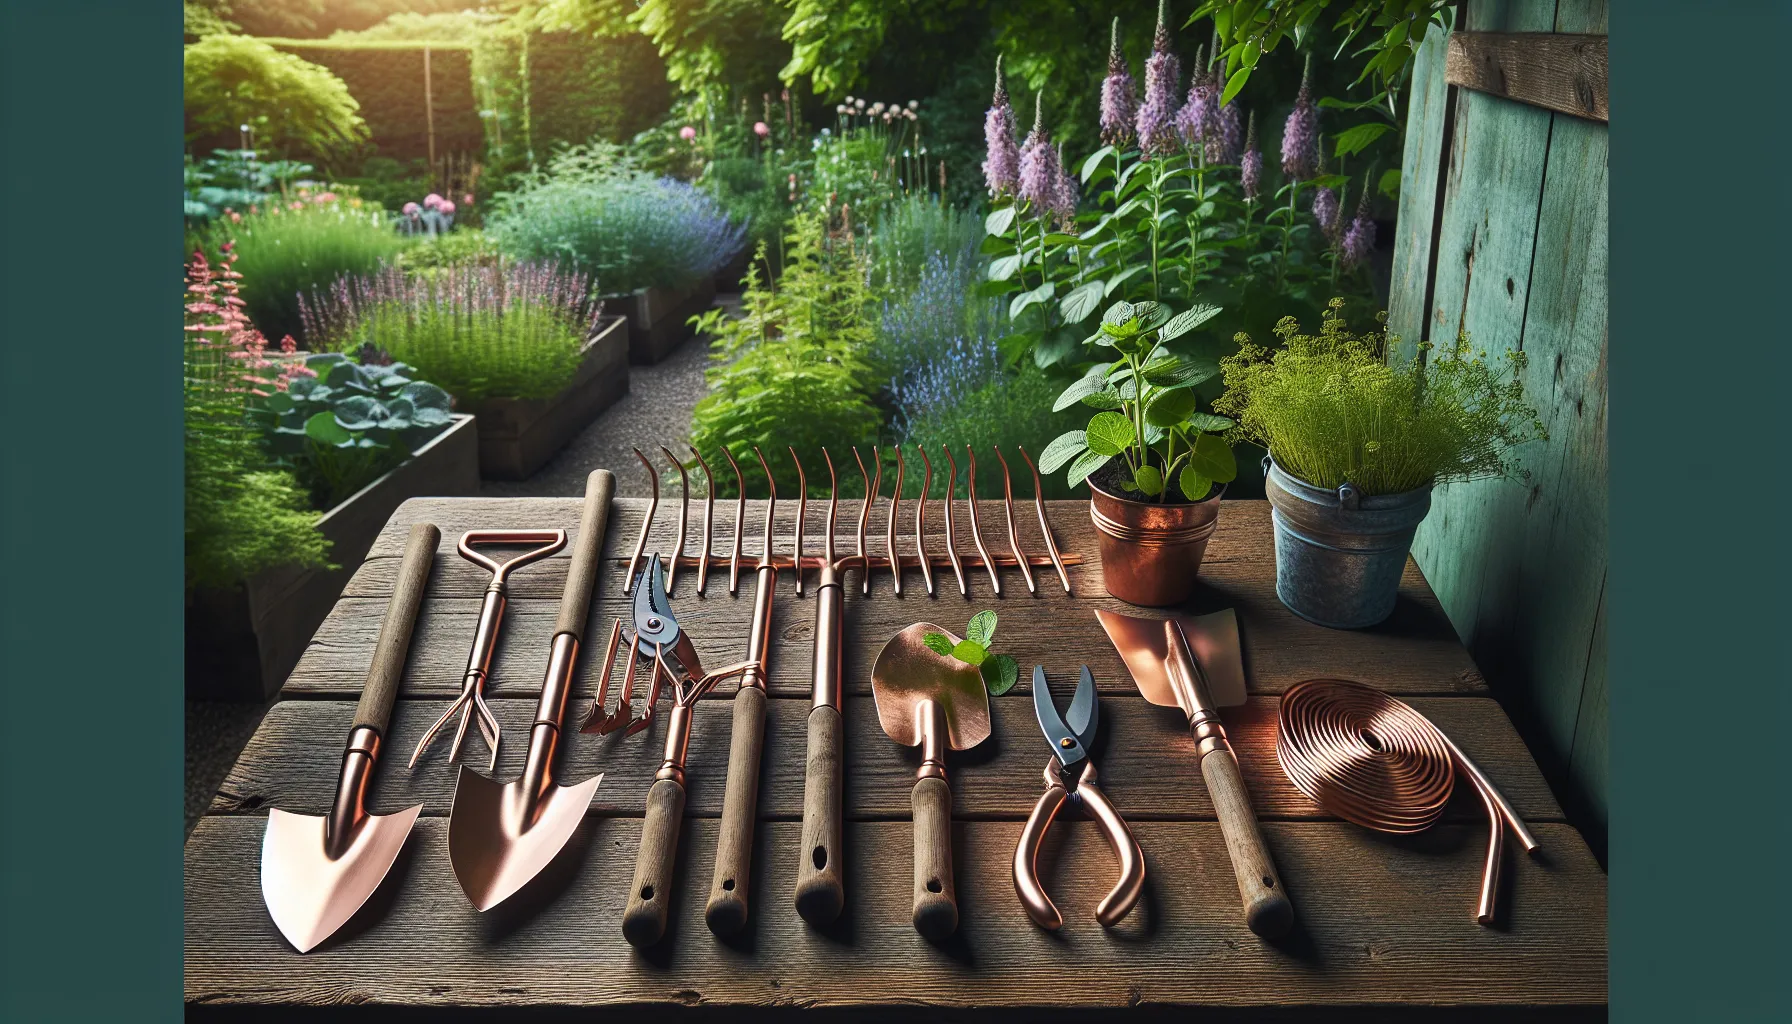 A collection of shiny copper garden tools laid out on a wooden table against a lush garden backdrop.